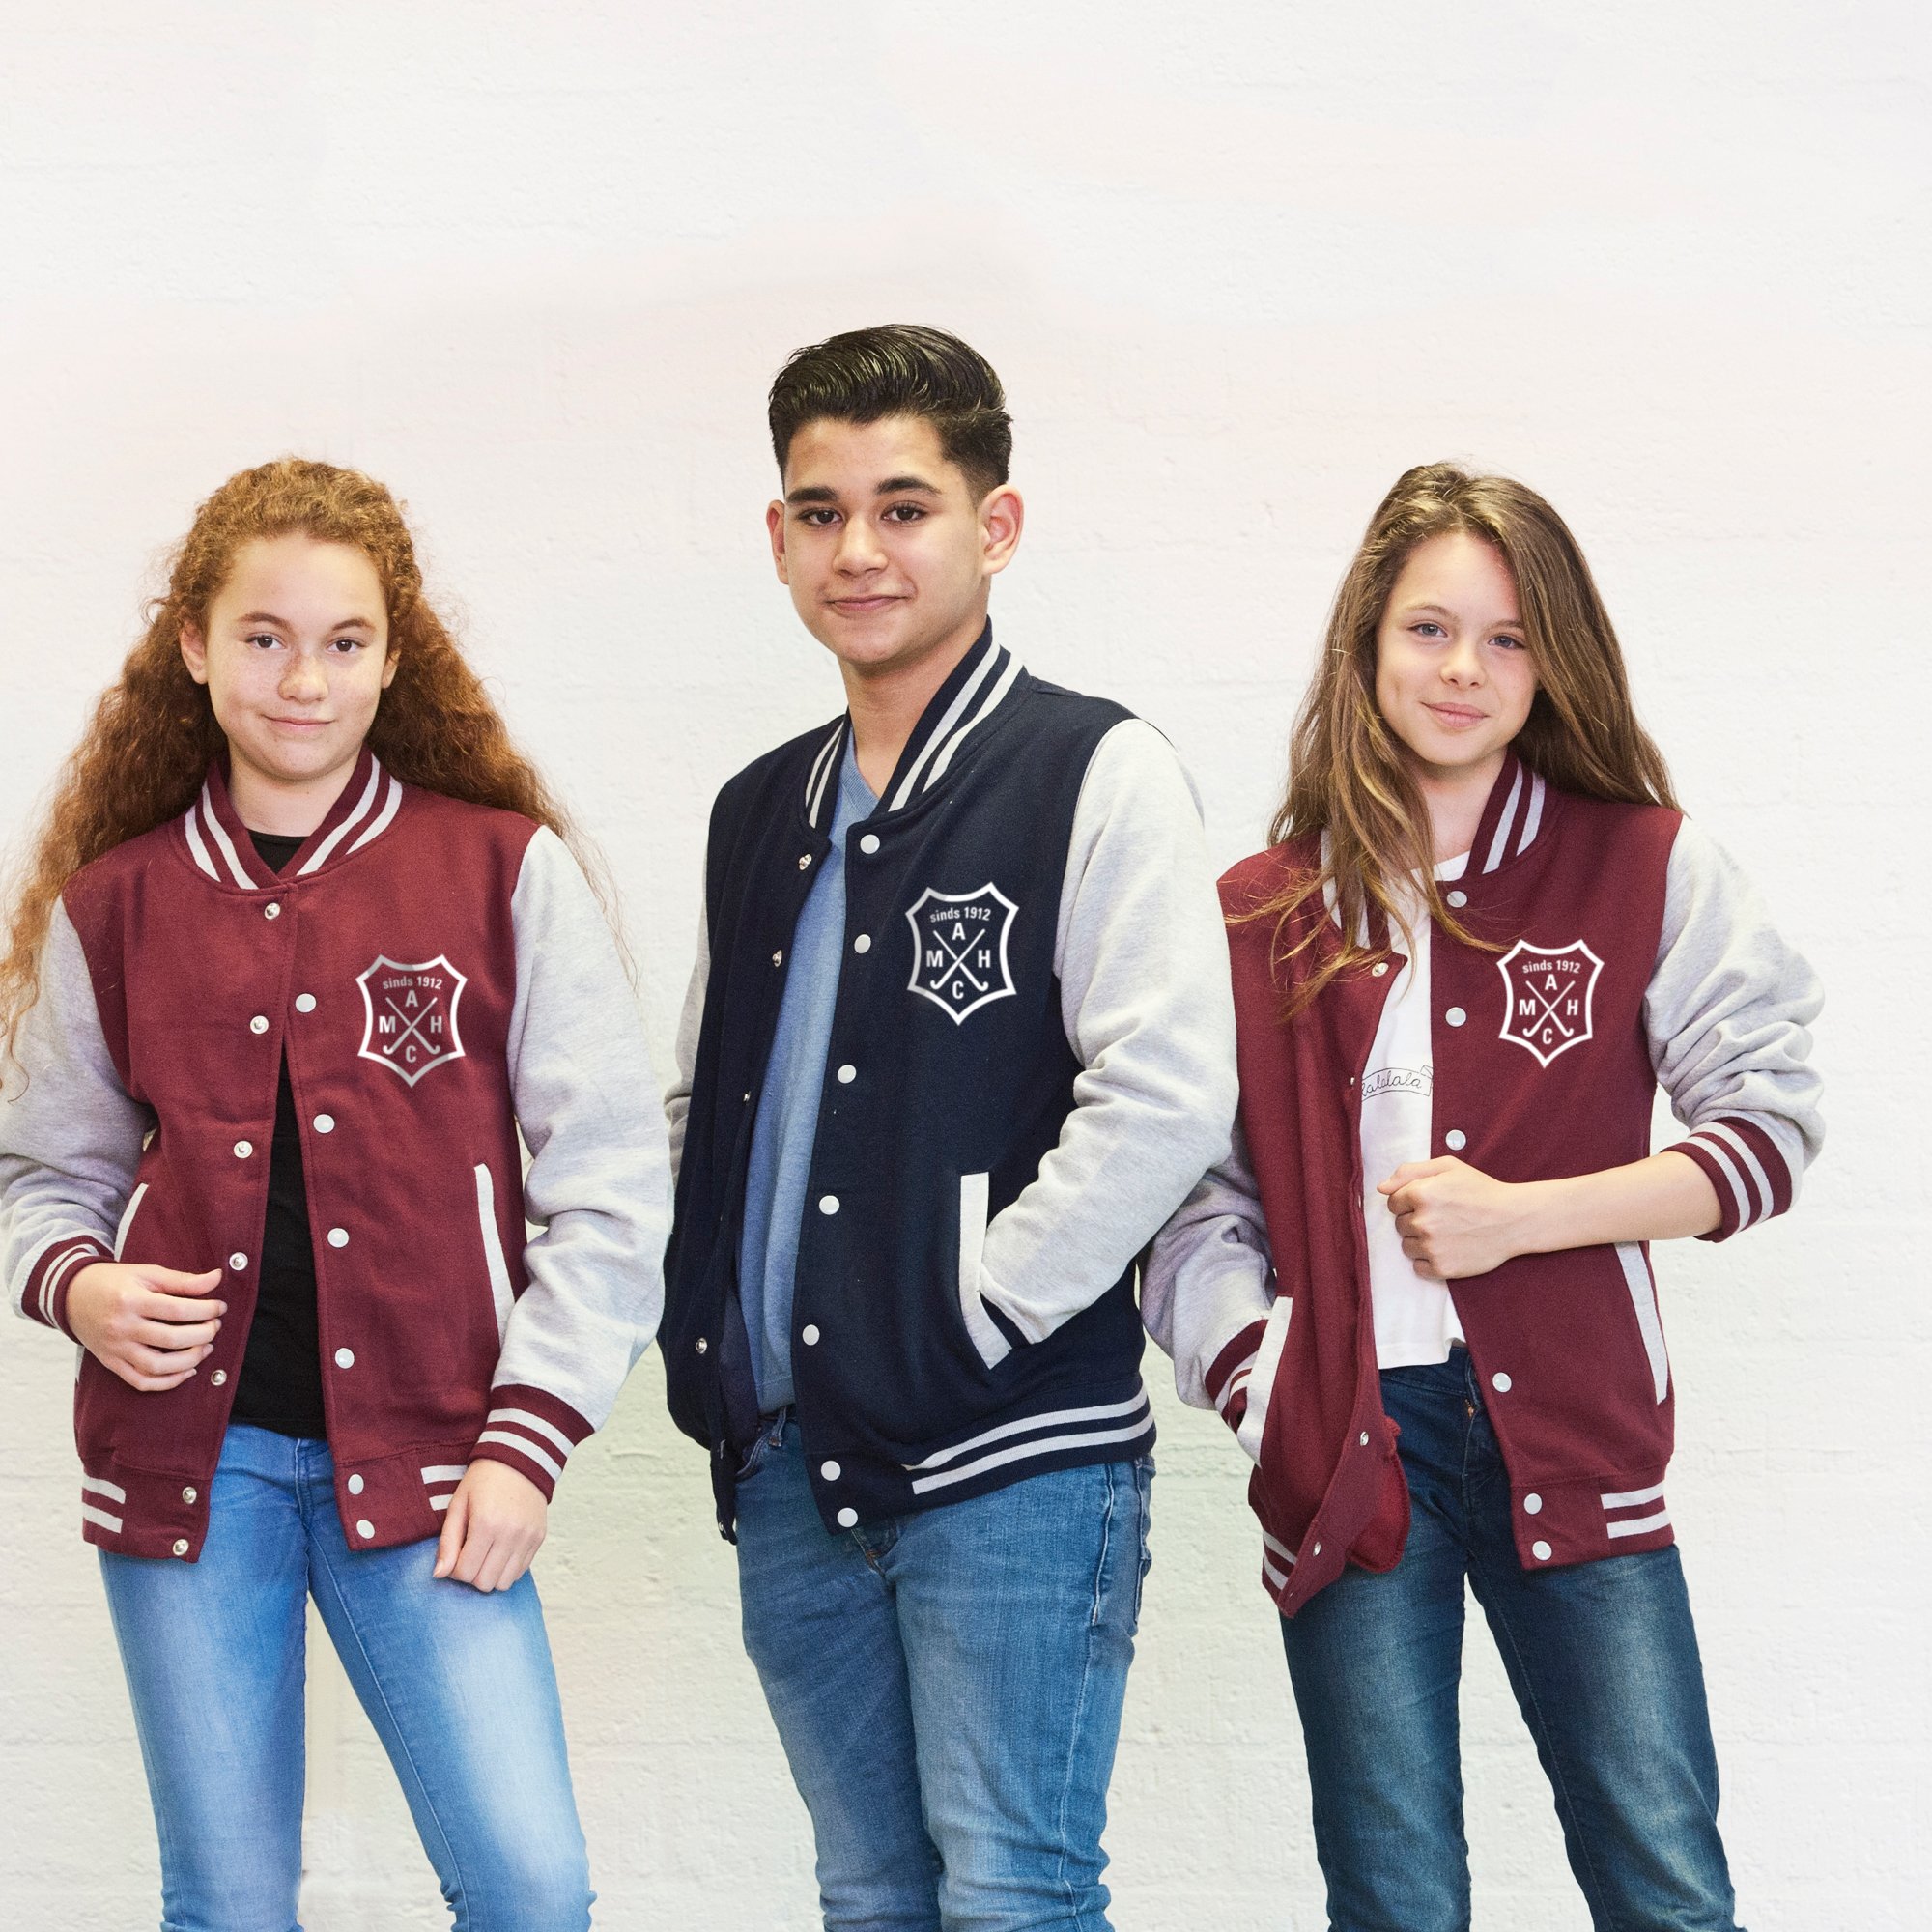 Three young people in baseball vests printed with a club logo